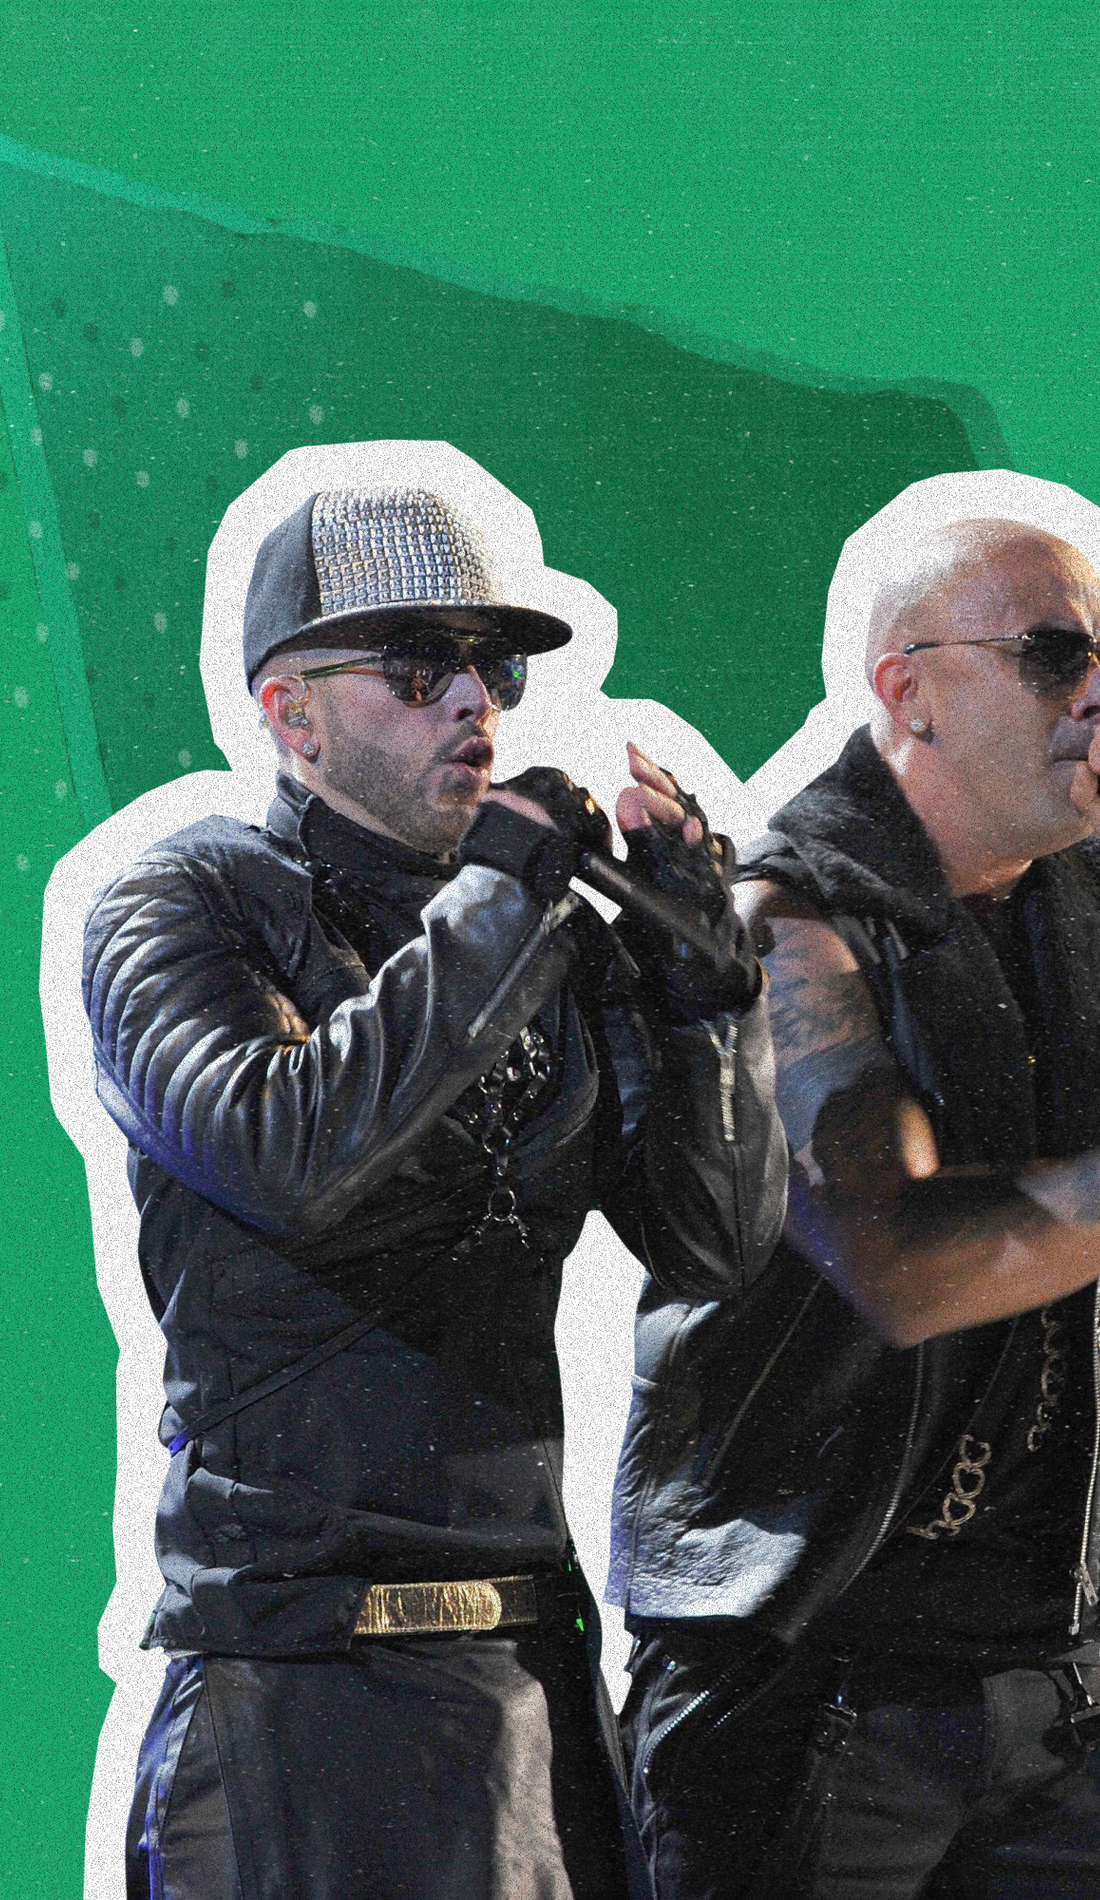 A Wisin Y Yandel live event